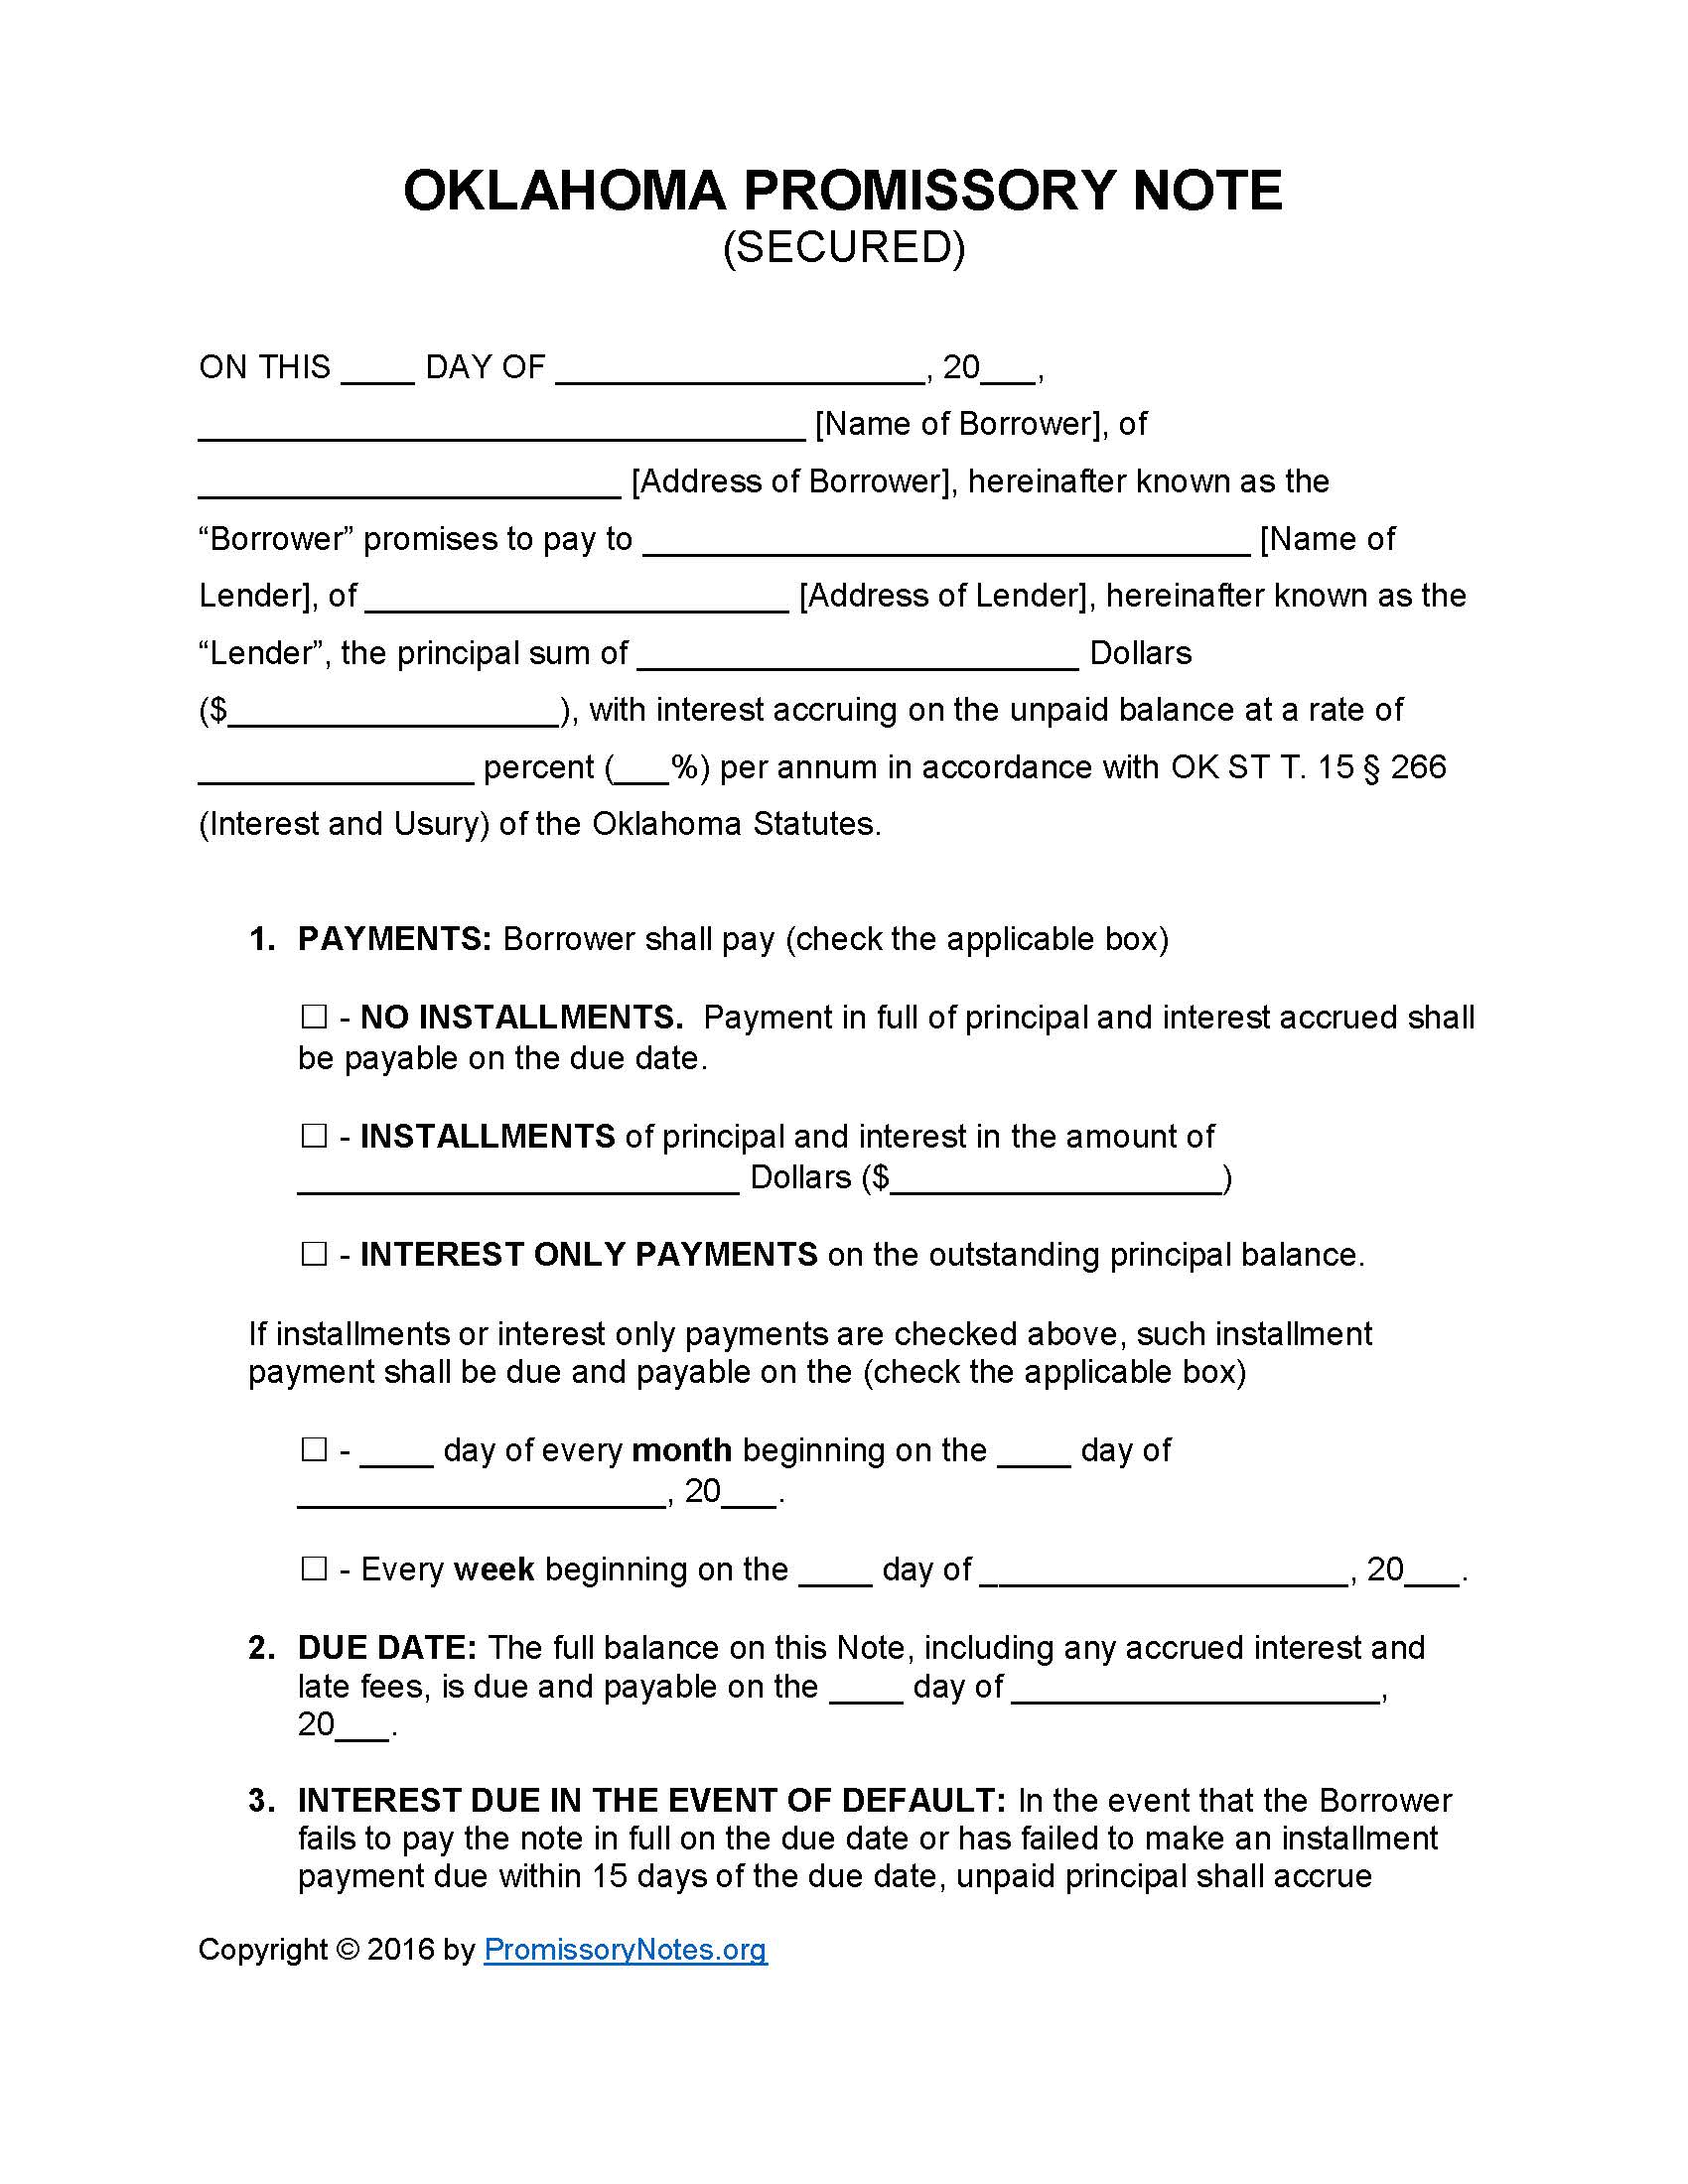 oklahoma-secured-promissory-note-form